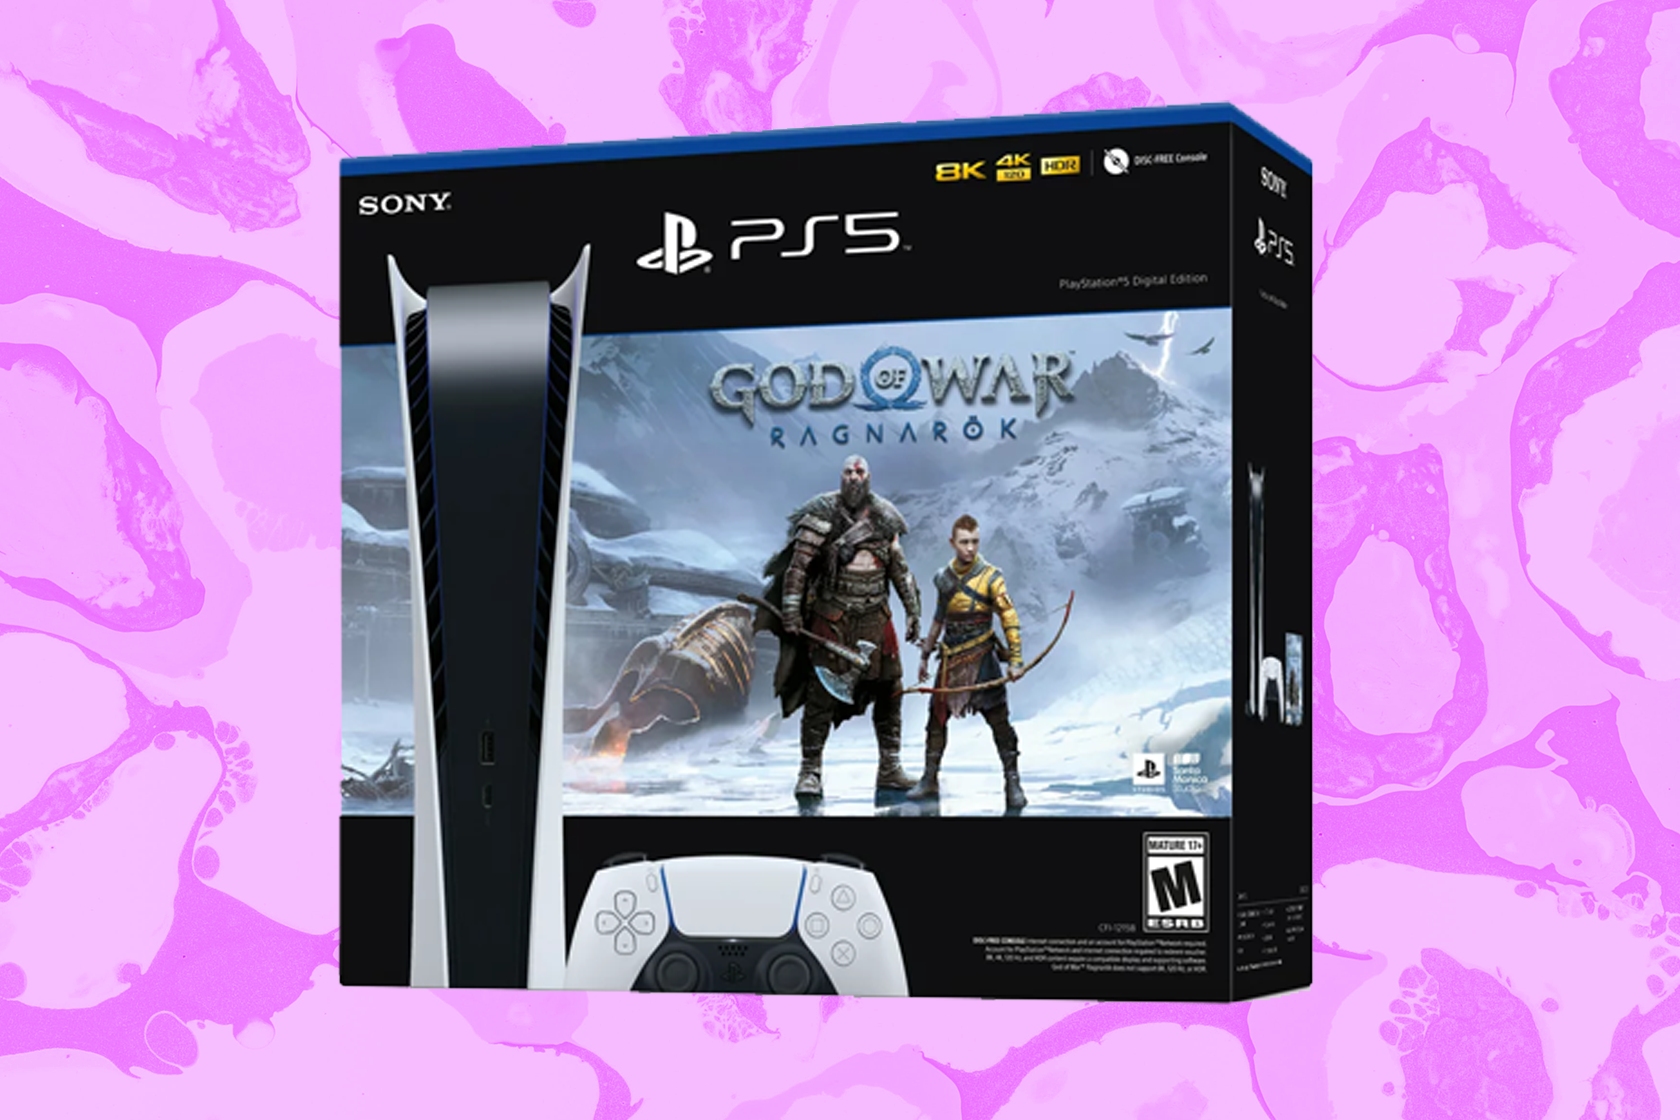 God of War PS5 bundle is back in stock at Walmart